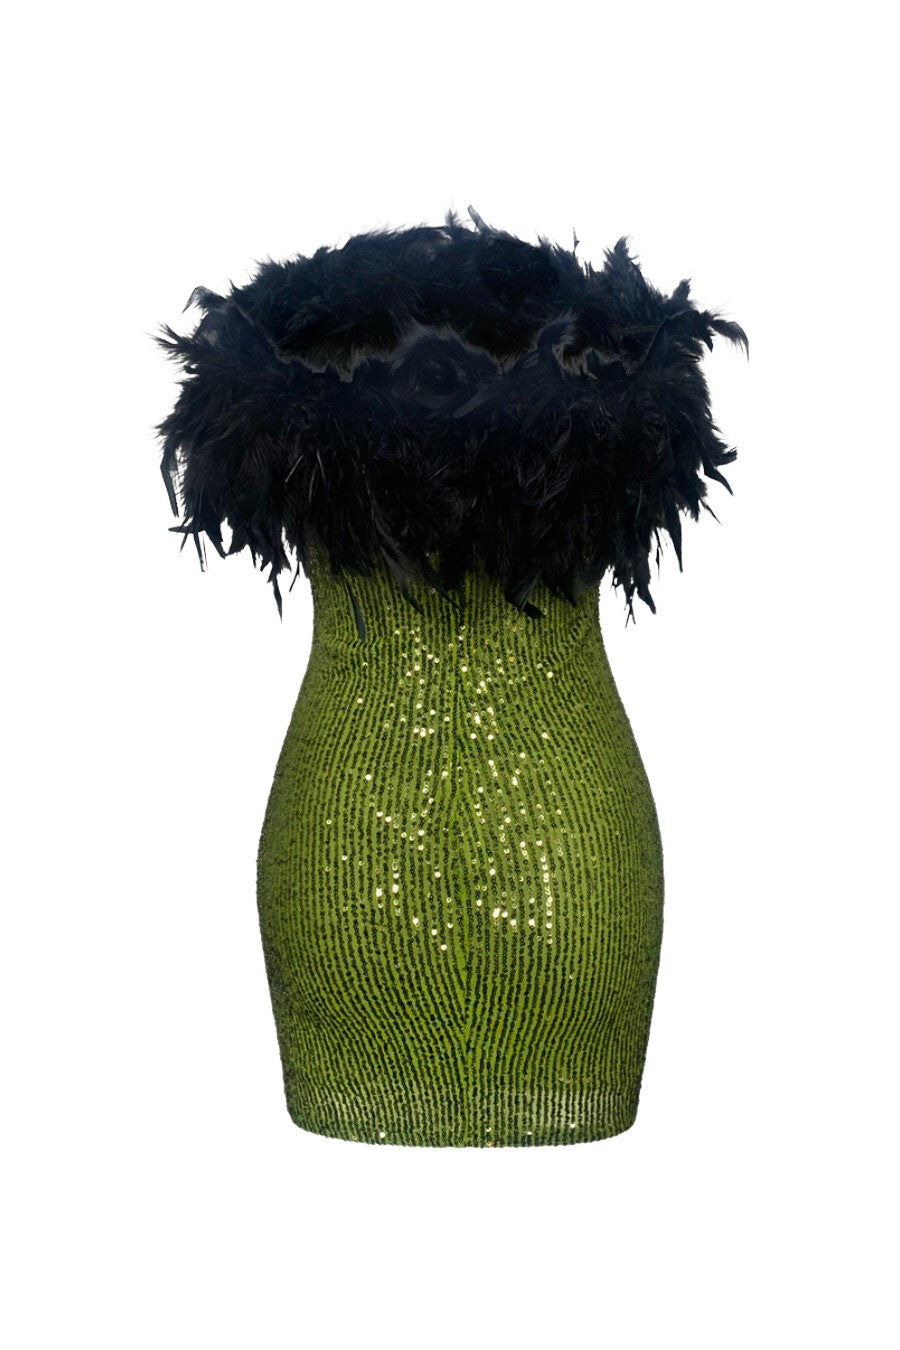 "NIGHT OWL" Olive Green Sequin & Vegan Ostrich Feather Short Tube Dress